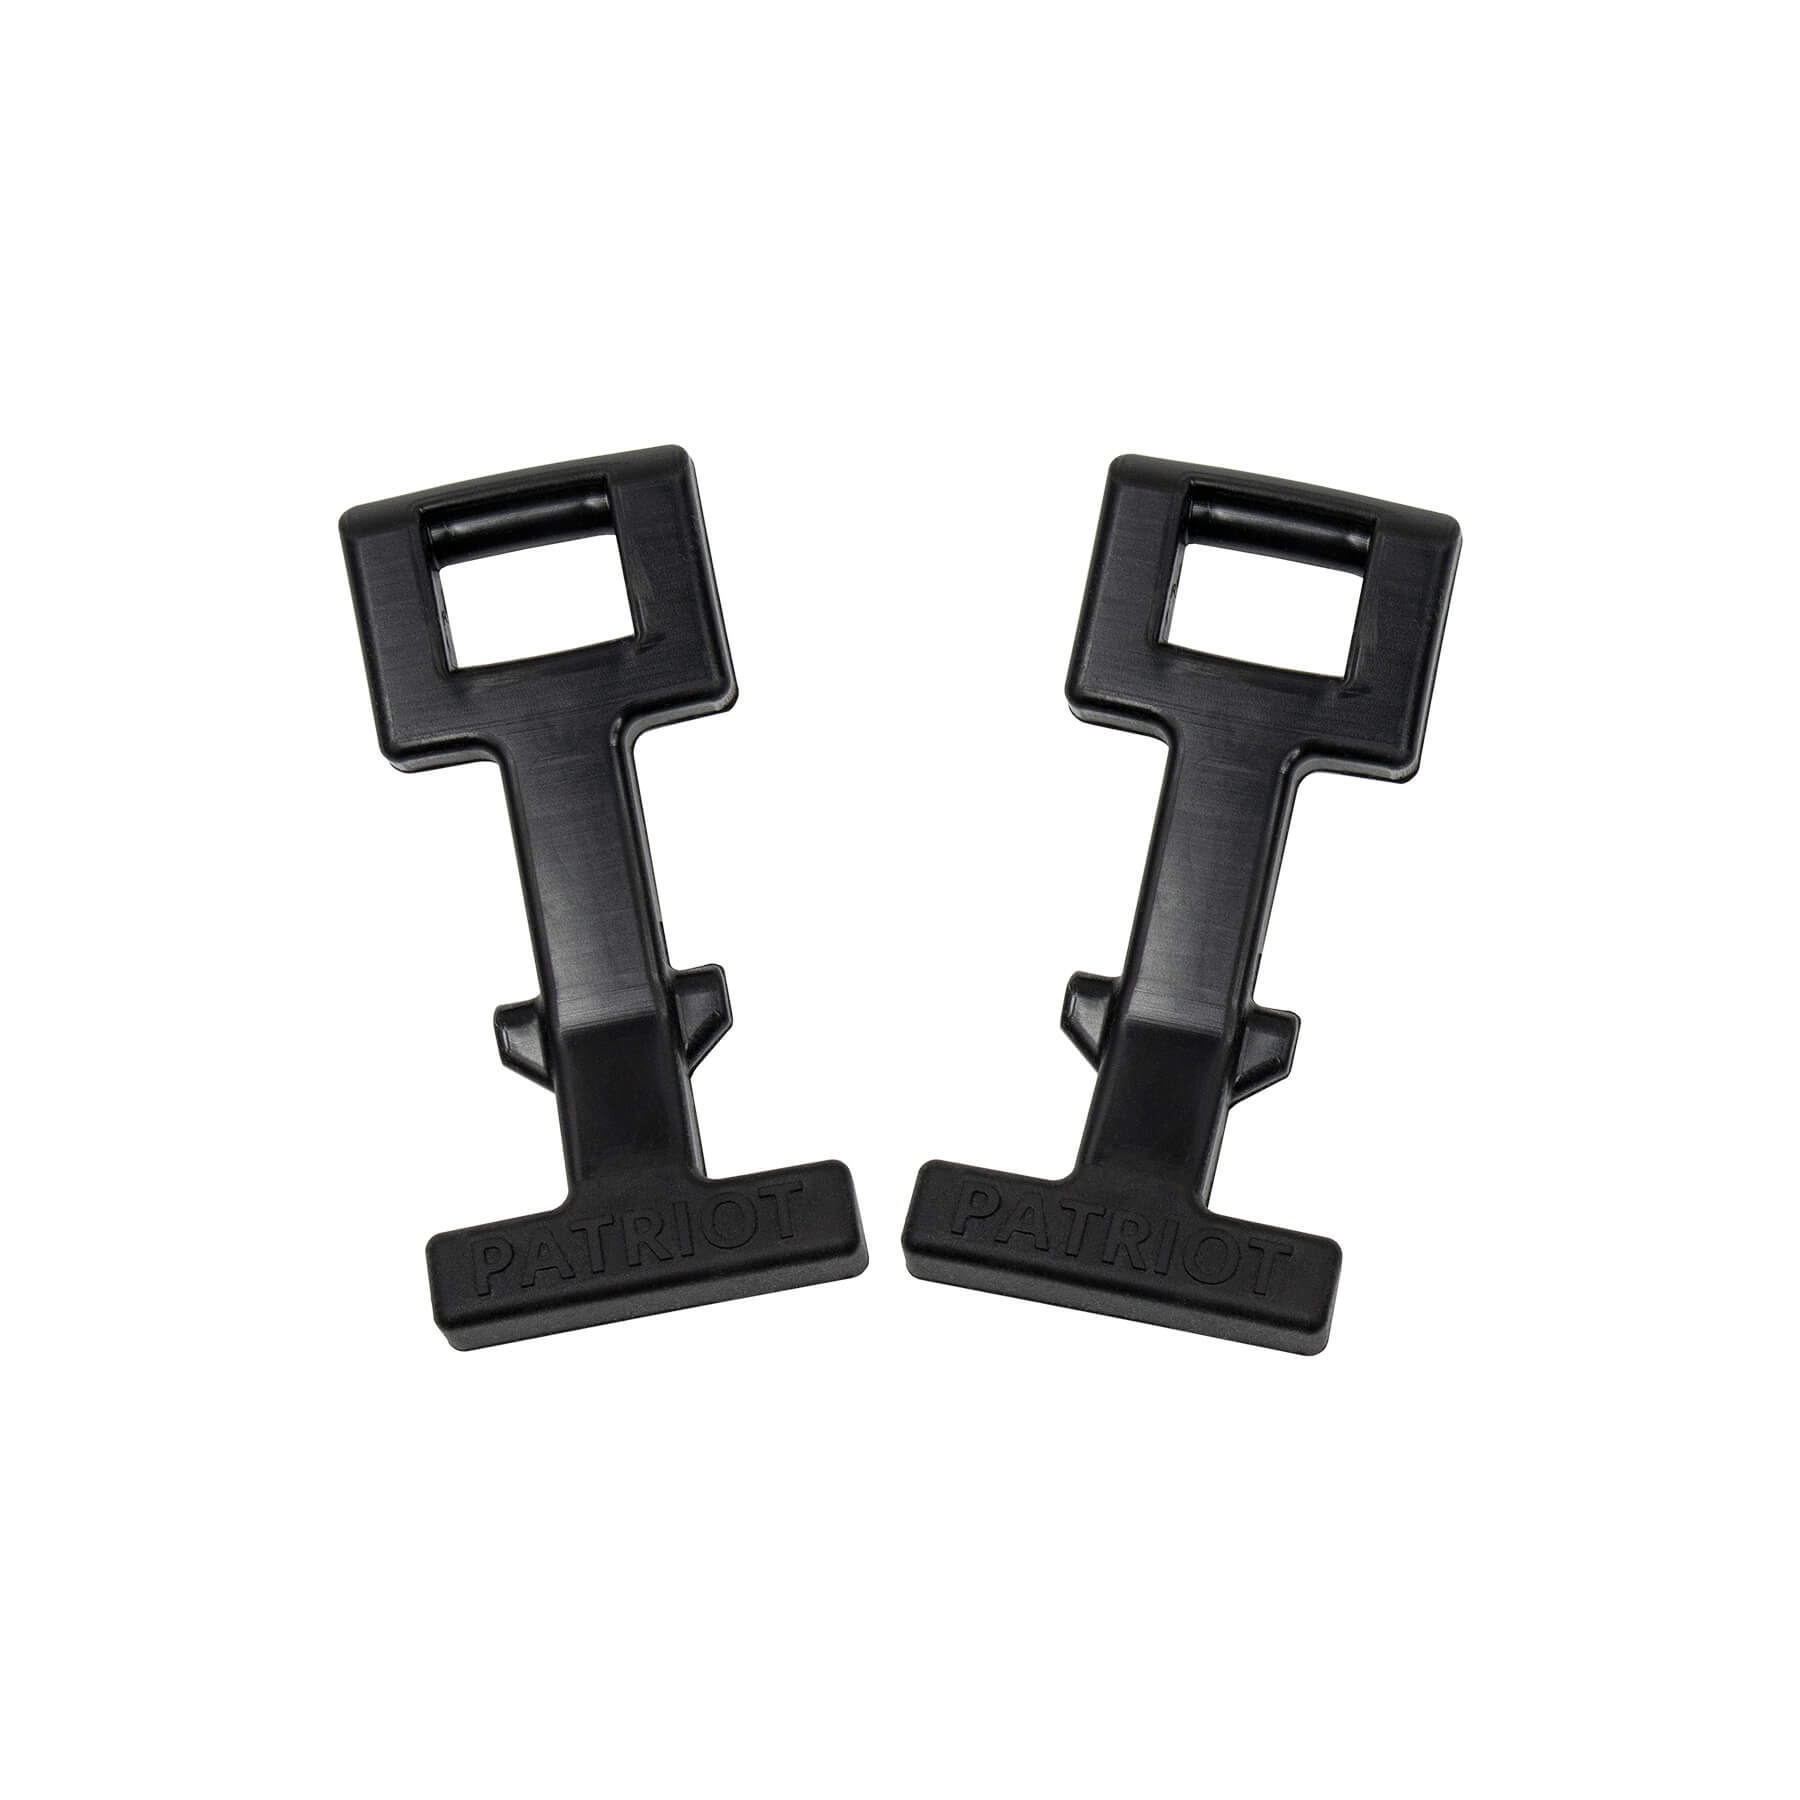 Rubber Cooler Latches | Replacement Latches | Patriot Coolers